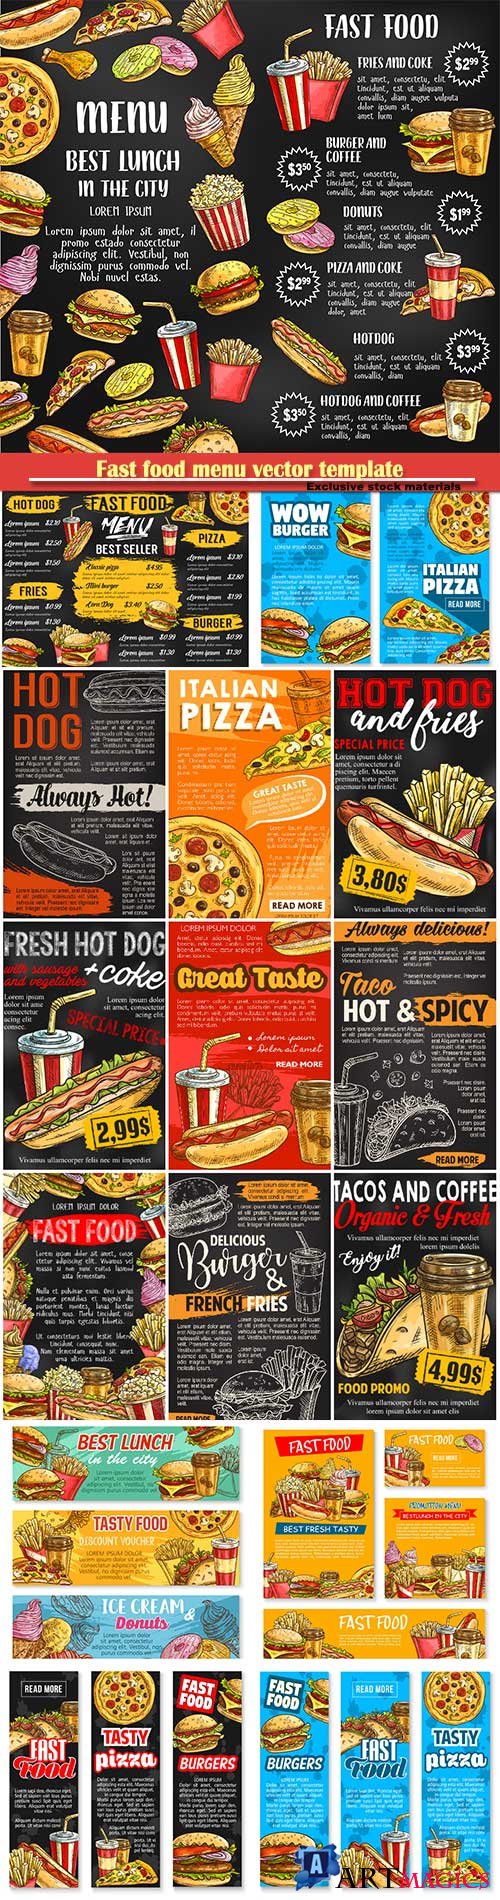 Fast food menu vector template, cheeseburger, burger, hotdog, sandwich, snack, french fries or pizza